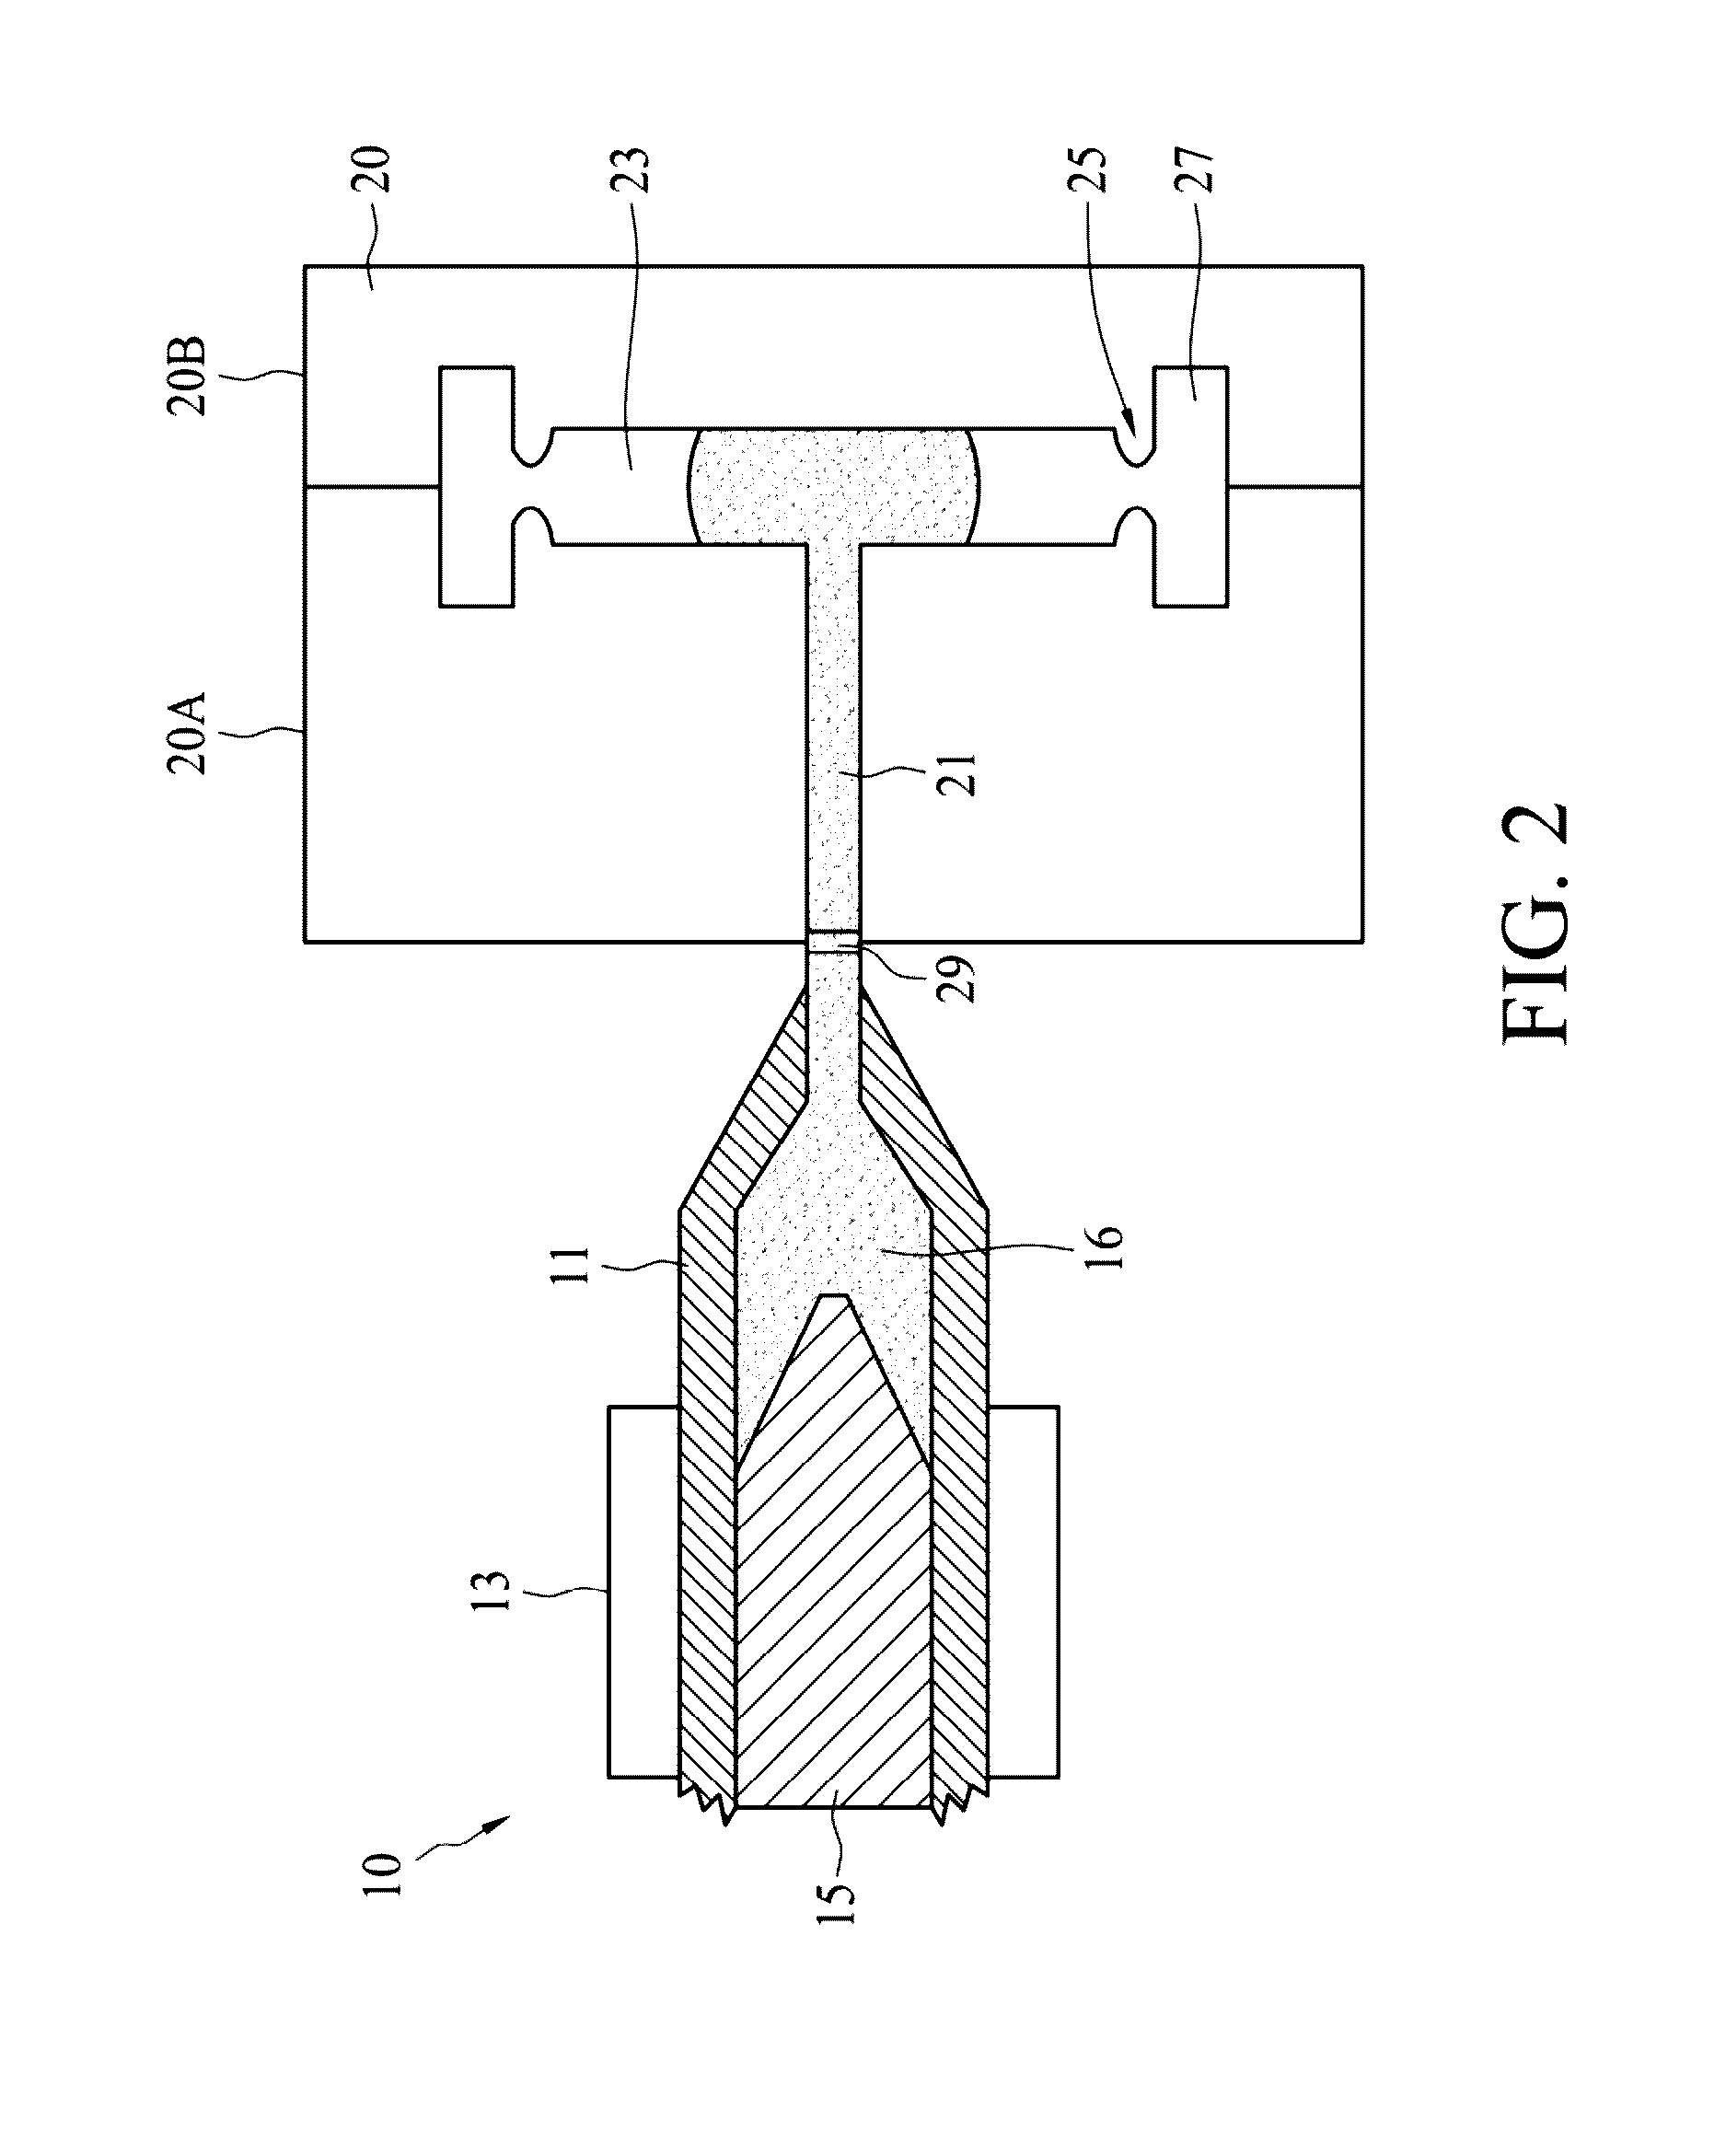 Method for operating a molding machine with a predicted in-mold PVT waveform of a molding resin